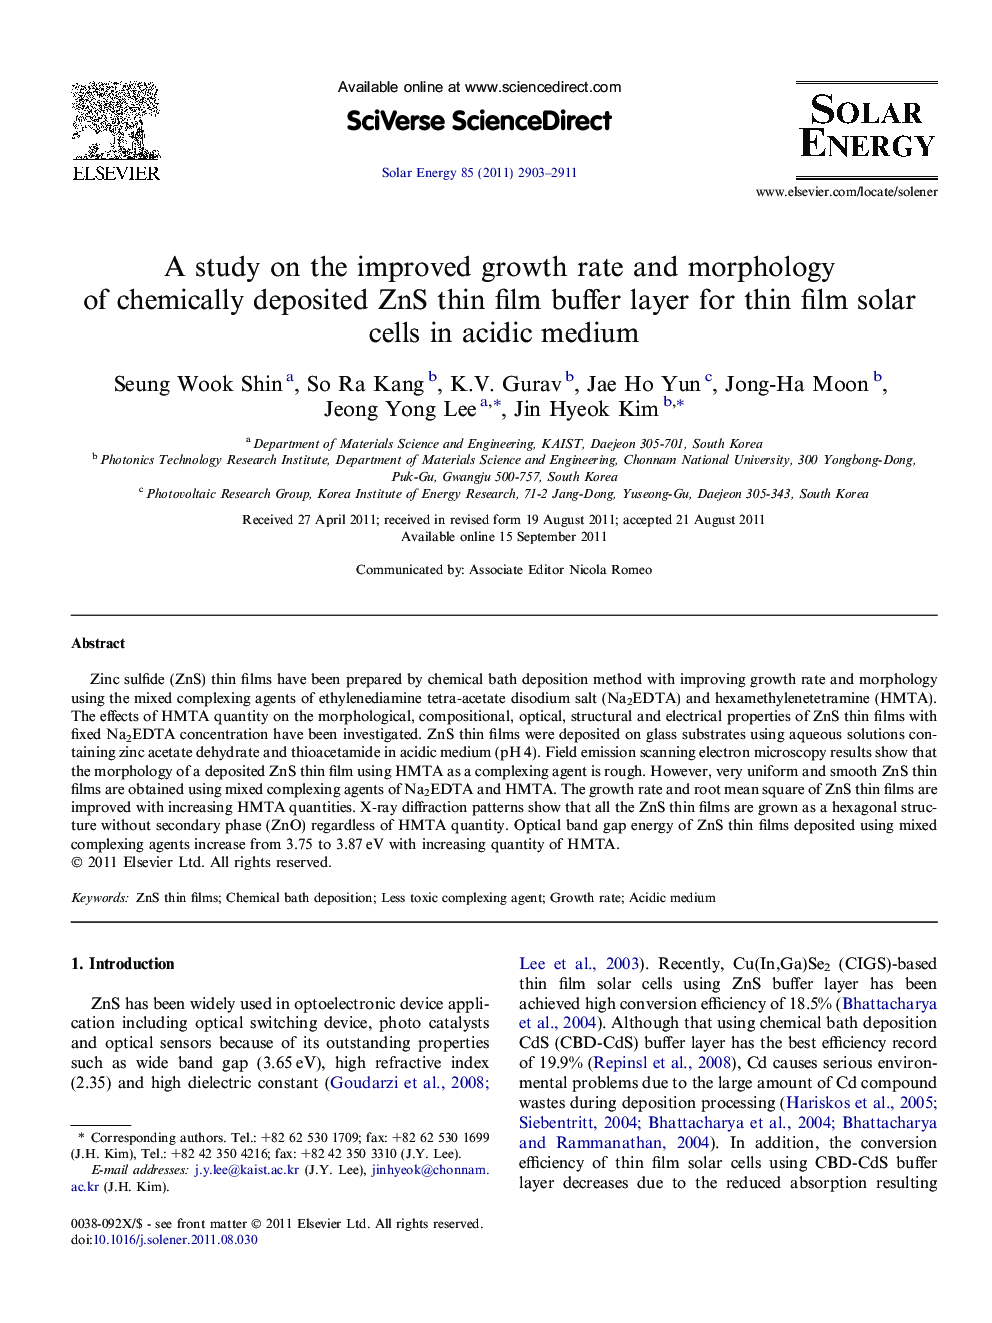 A study on the improved growth rate and morphology of chemically deposited ZnS thin film buffer layer for thin film solar cells in acidic medium